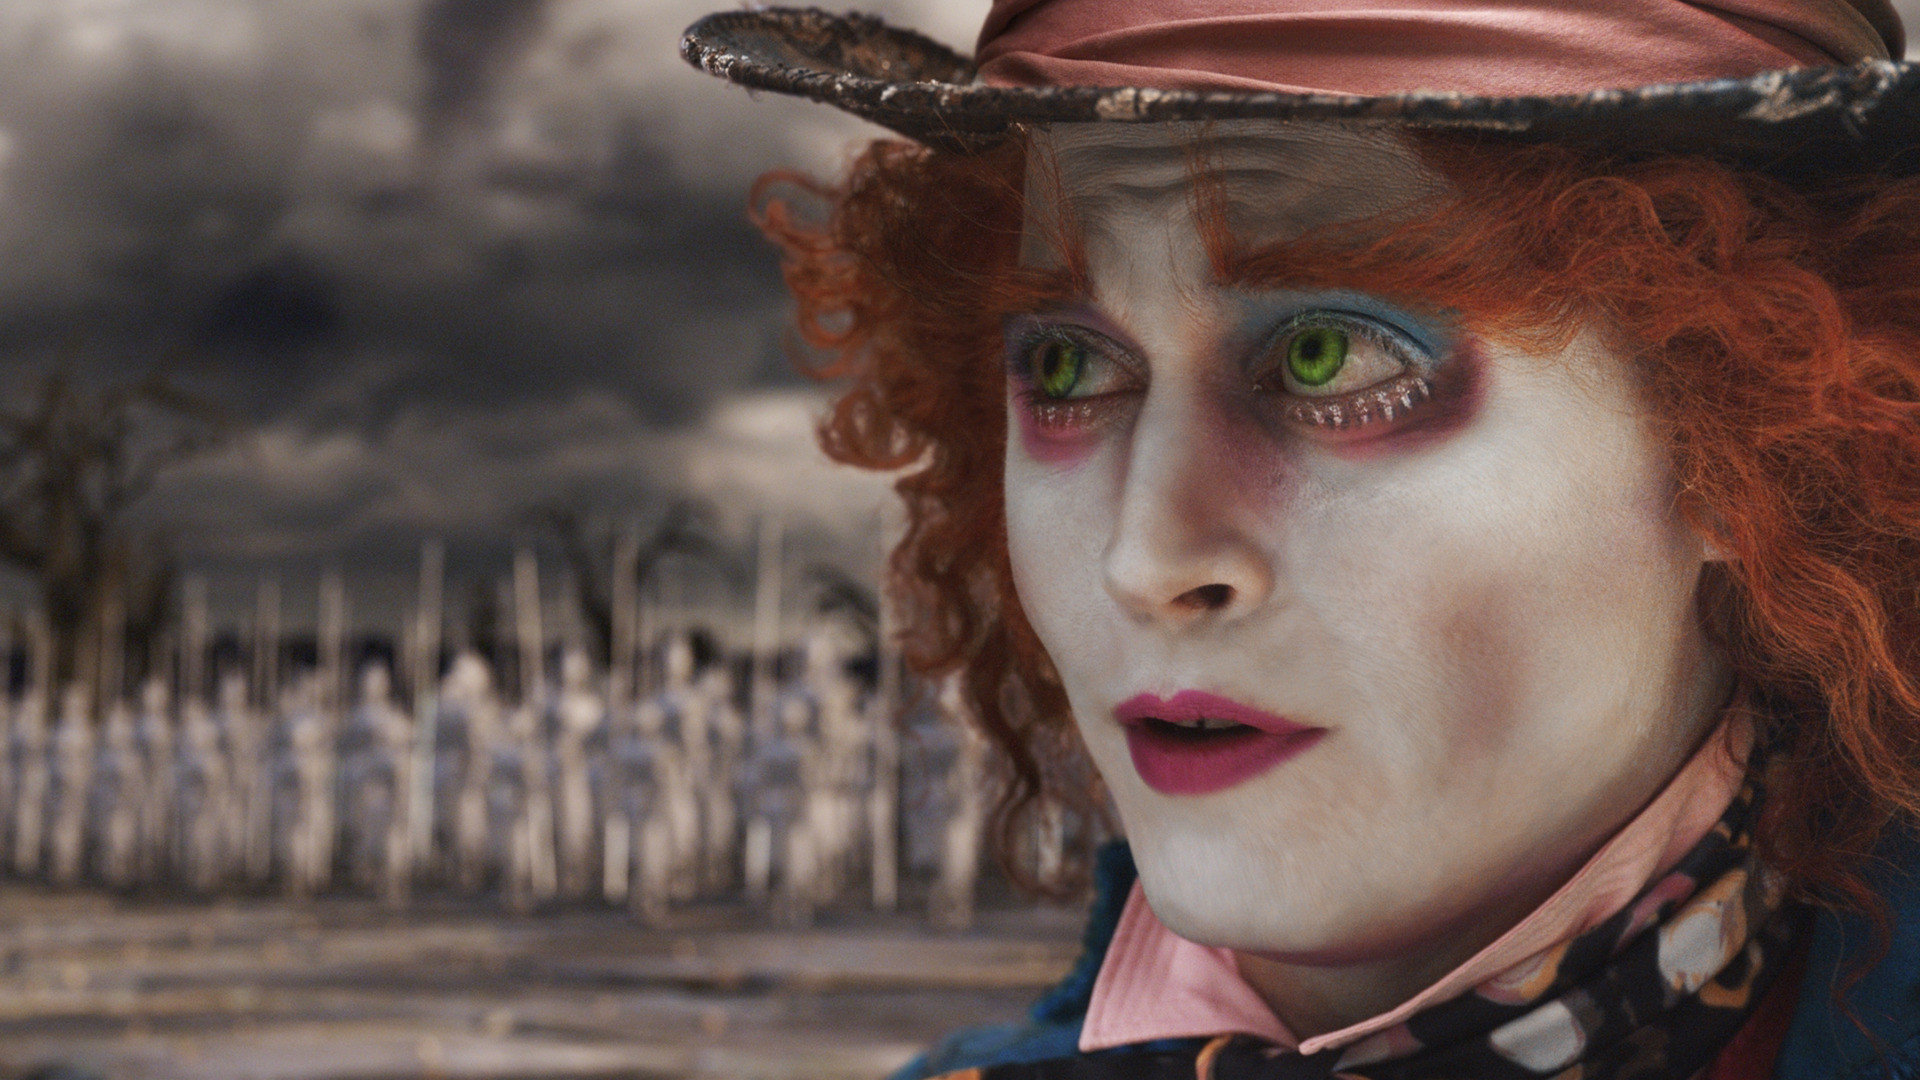 Mad Hatter Wallpapers 1920x1080 Full Hd 1080p Desktop Backgrounds Images, Photos, Reviews